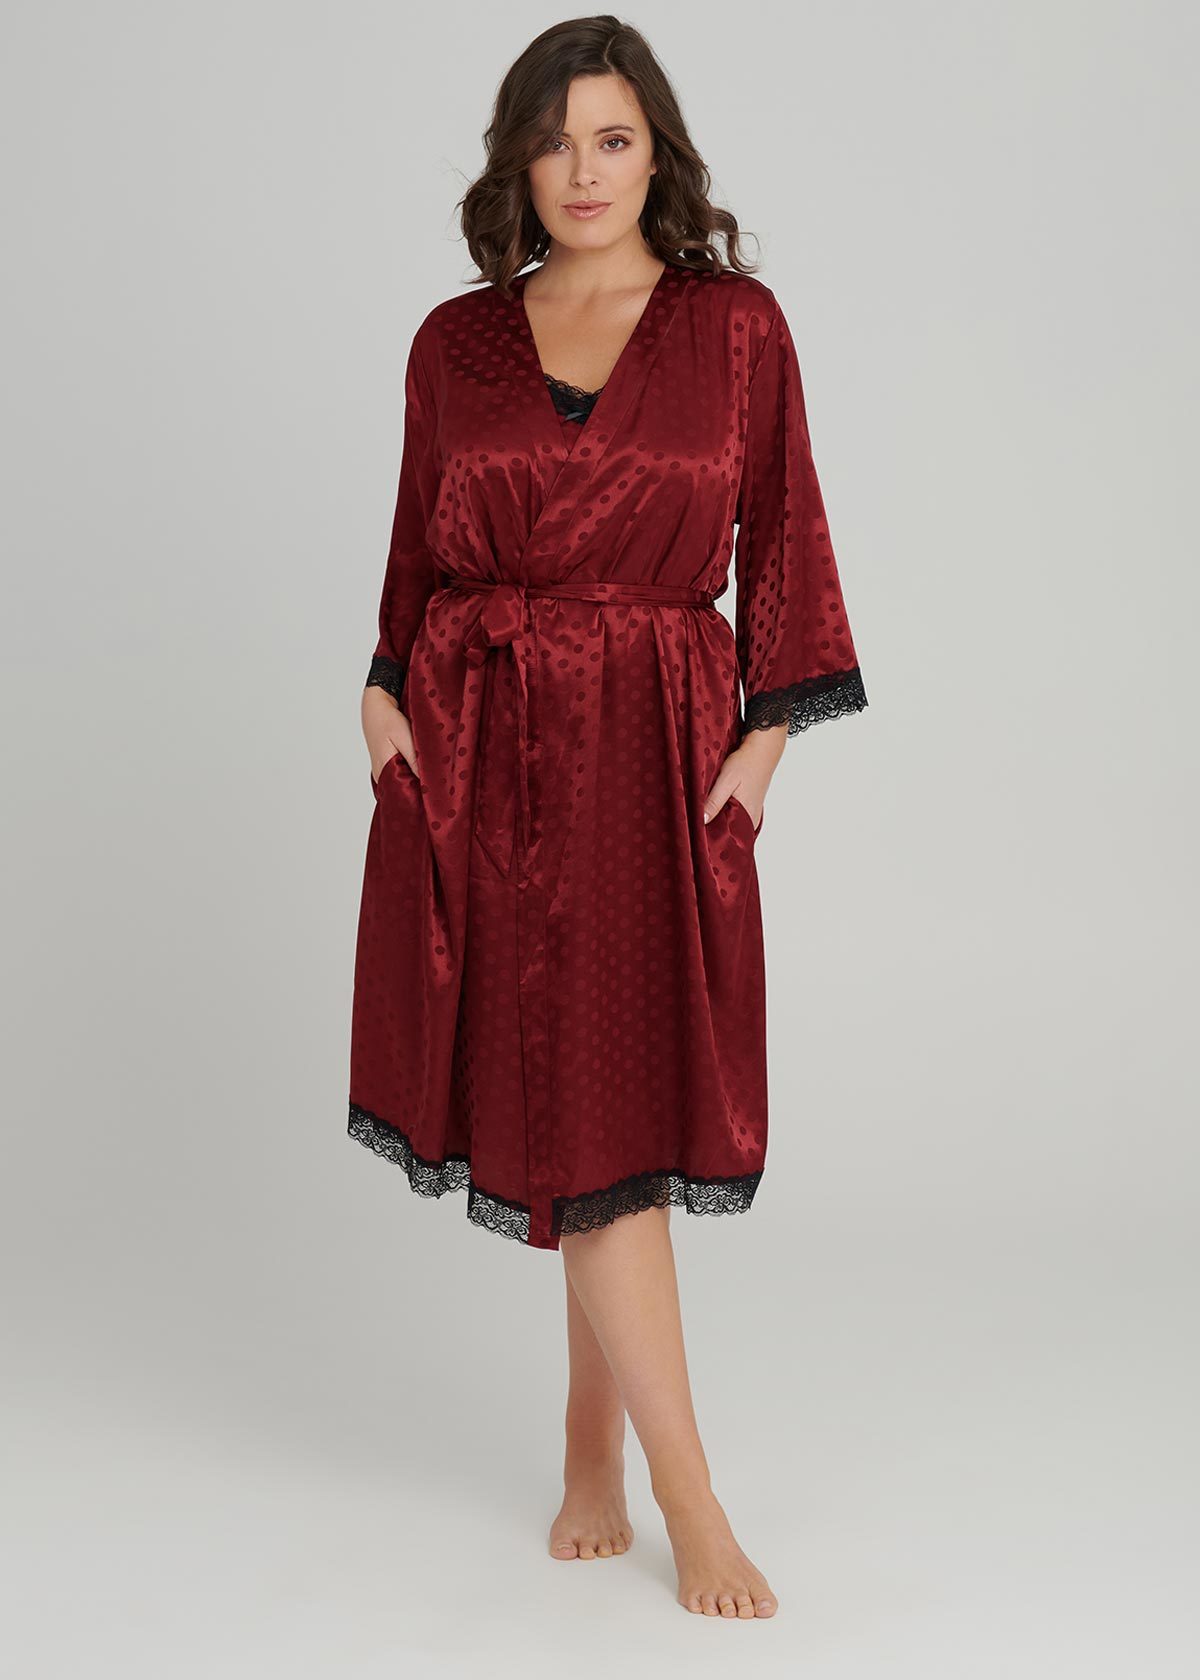 Lace Trim Robe in Red, Sizes 12-30 | Taking Shape NZ